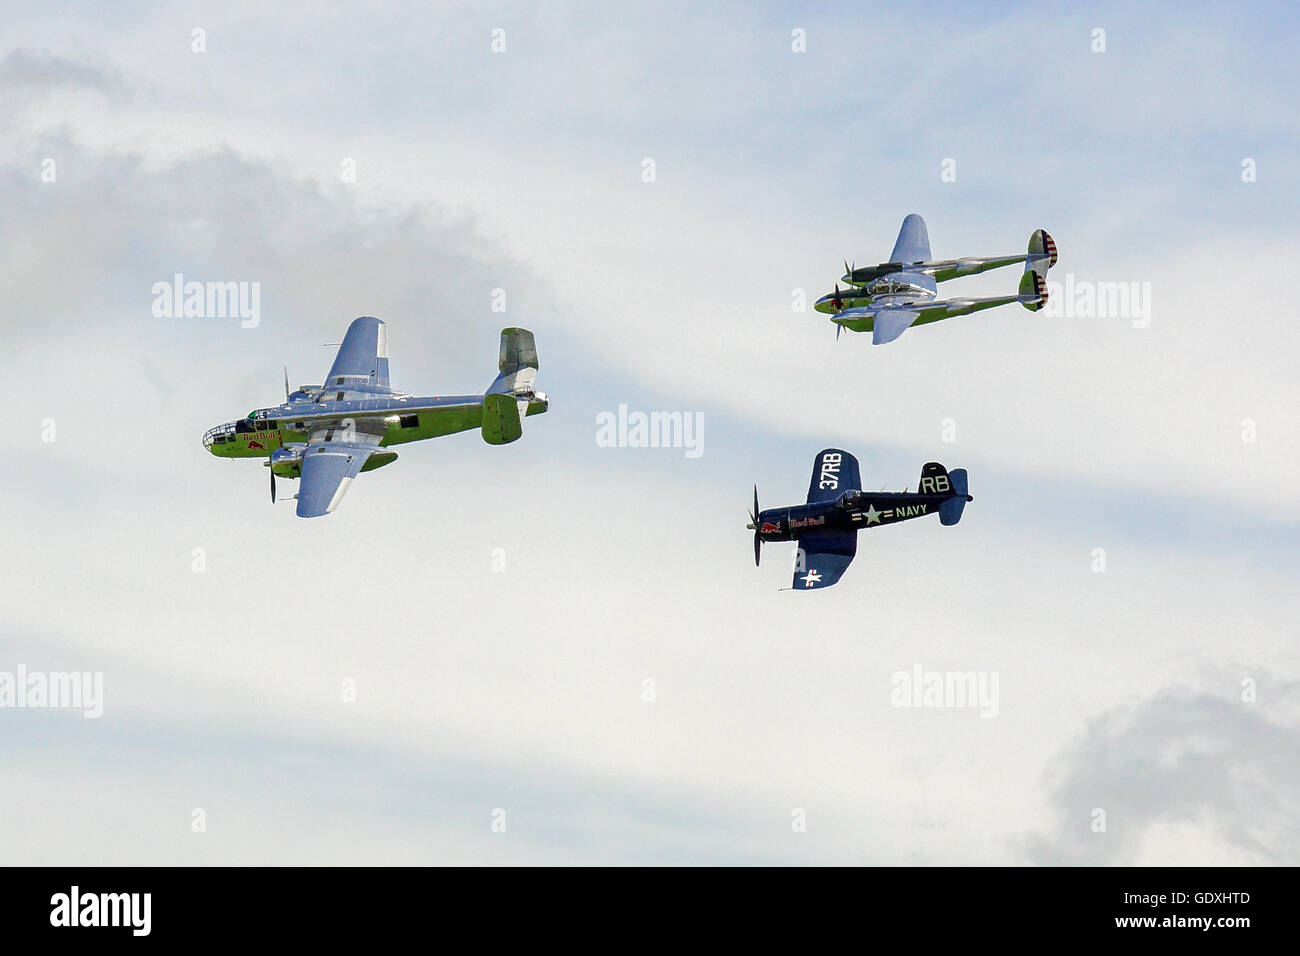 B25 Mitchell, P38 Lightning, FU-4 Corsair in formation at Flying Legends RAF Duxford Stock Photo